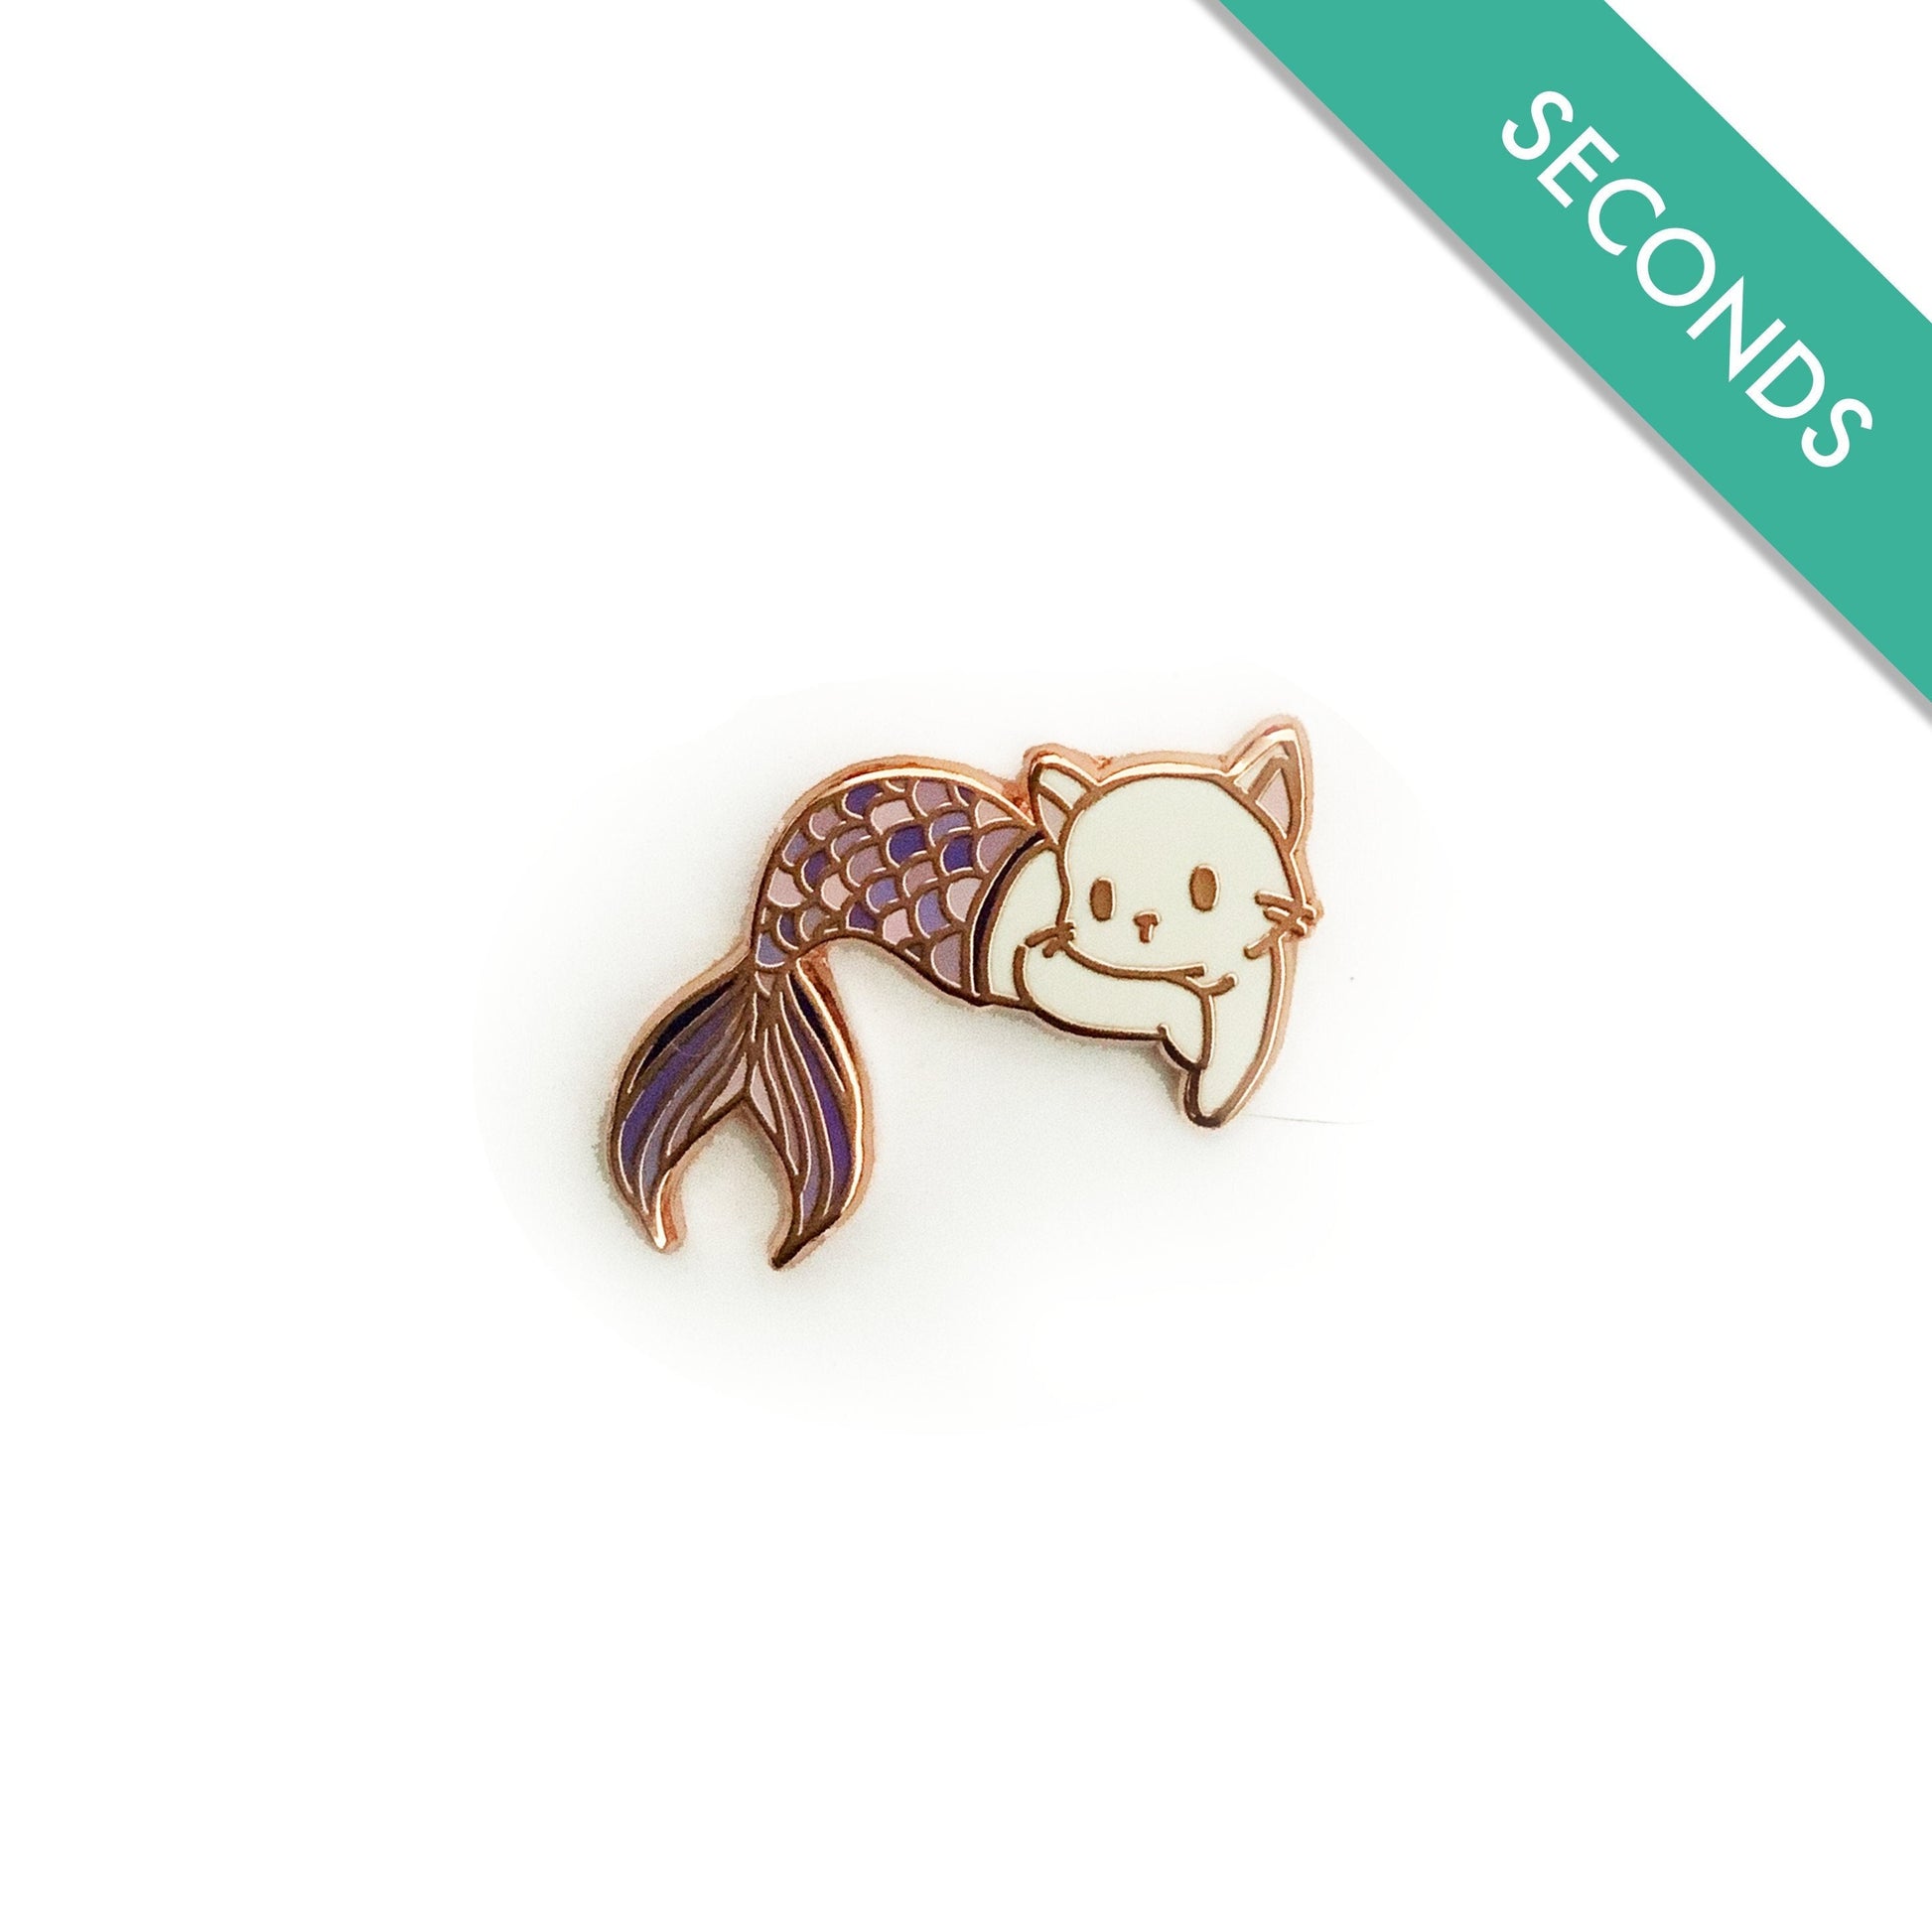 Purrmaid IV Pin - Pin Seconds - Small Enamel Pin (White Cat with Lavender/Purple Tail)